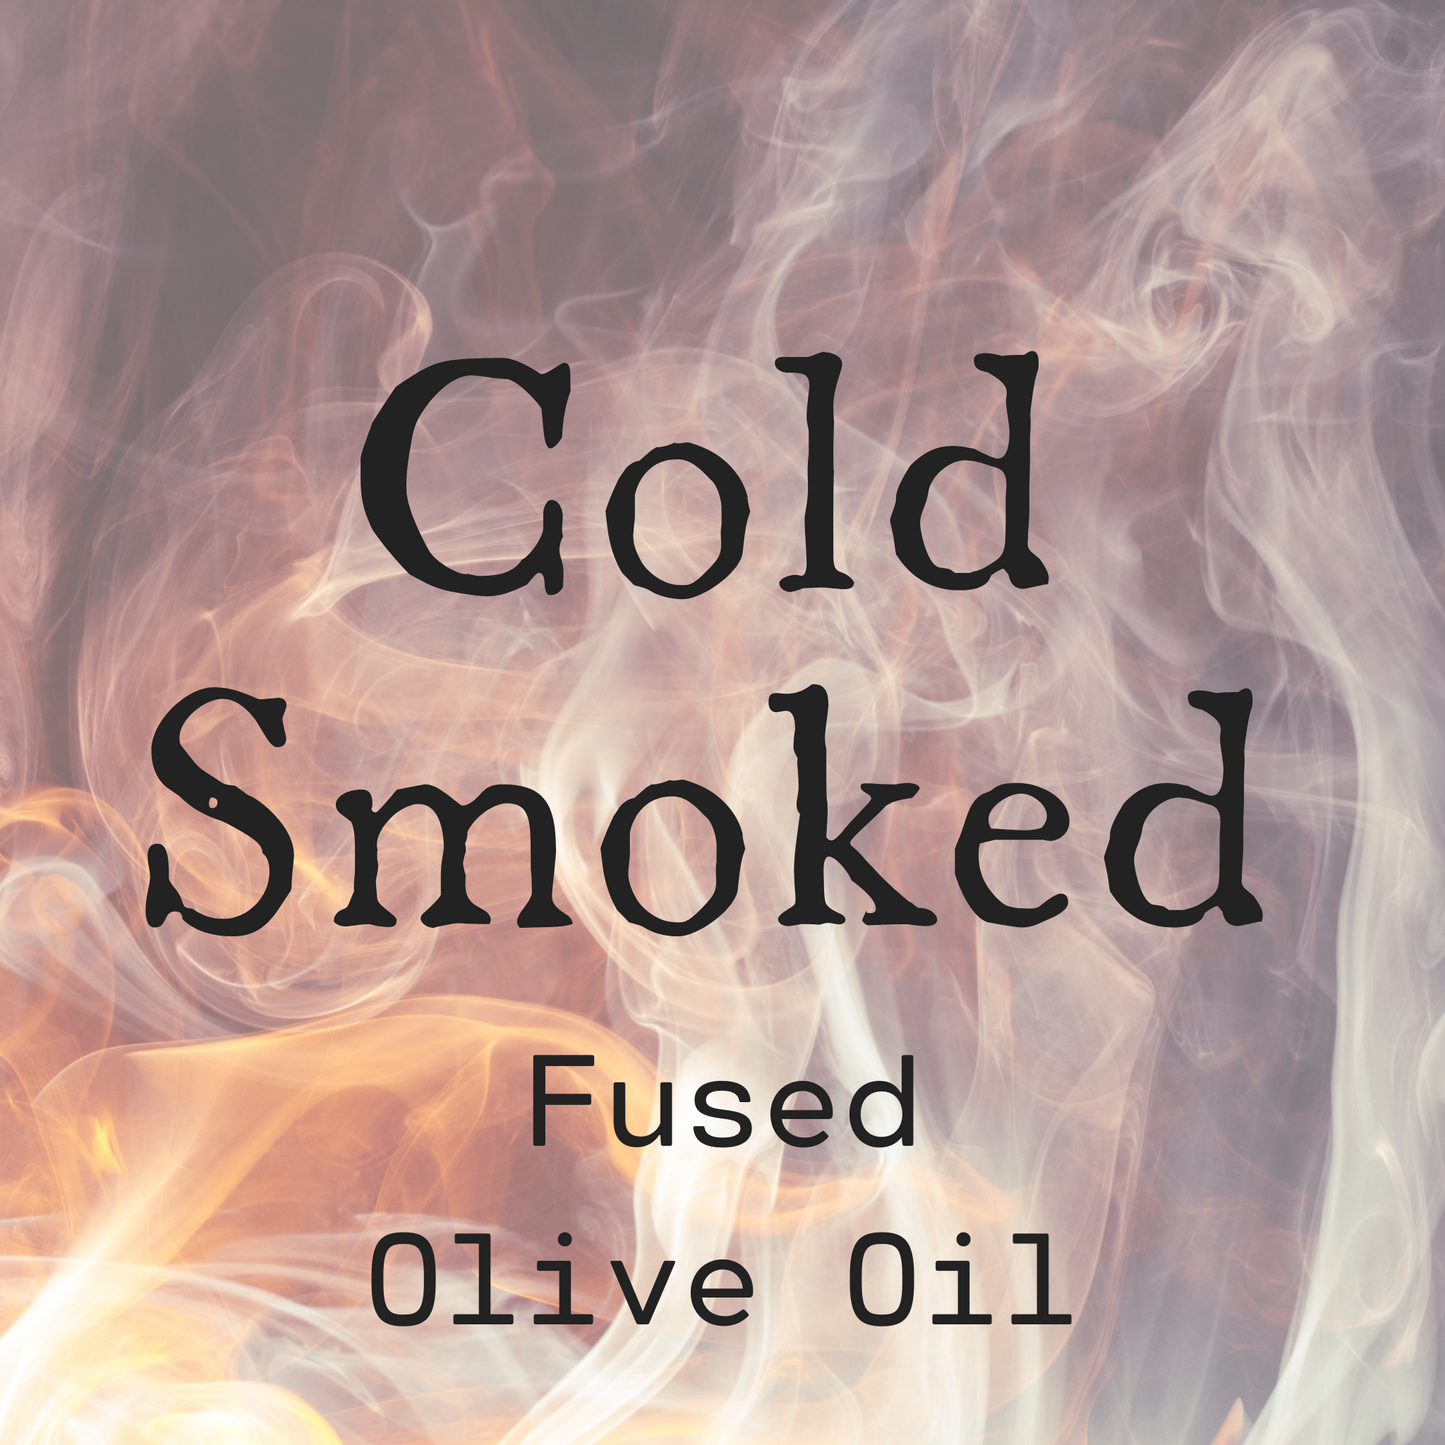 Cold Smoked Fused Olive Oil